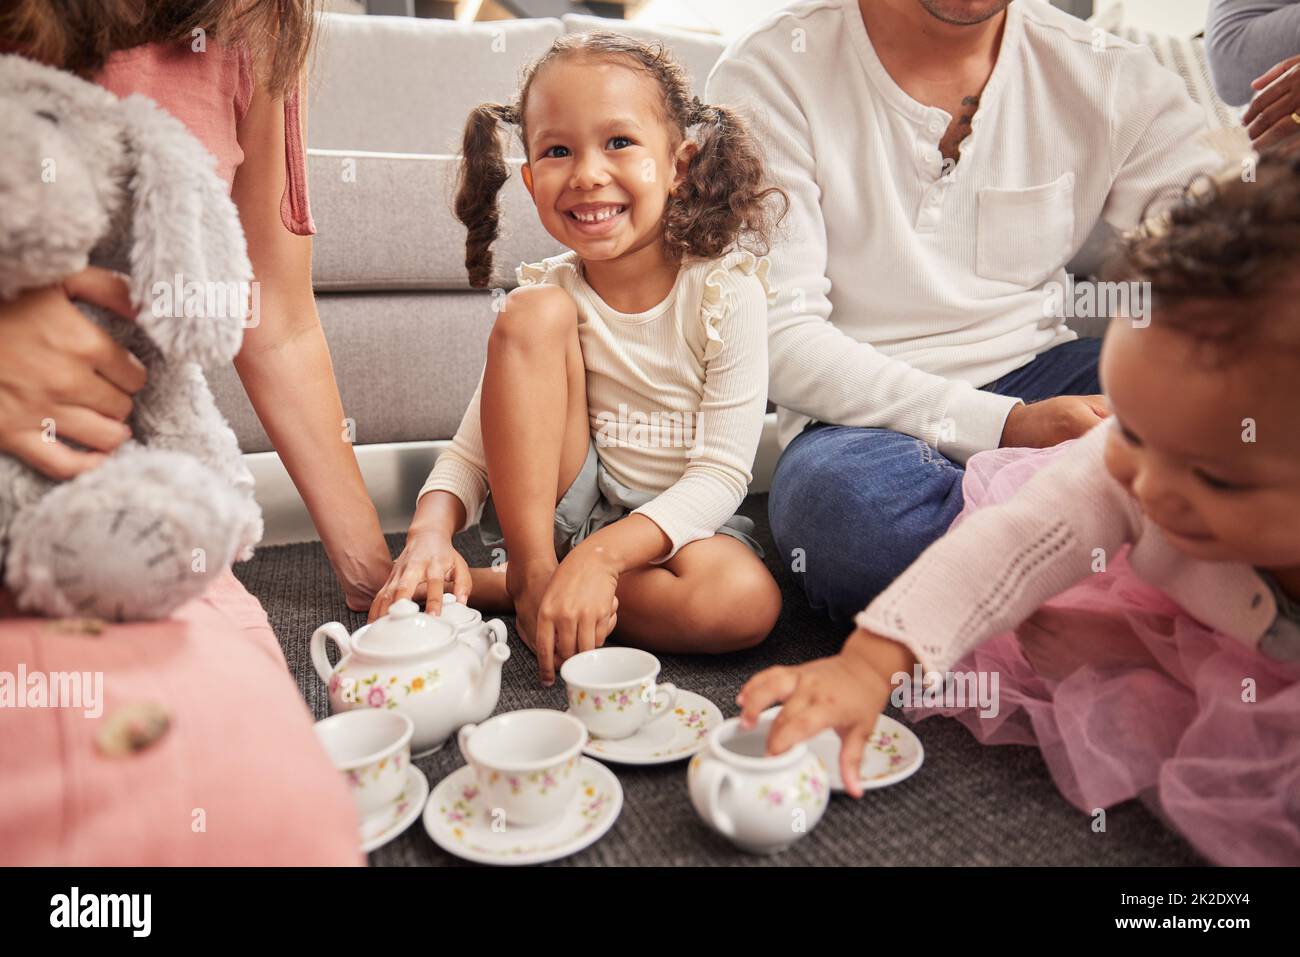 Happy, kids and children at play date have tea party, fun and playing together on home living room floor. Development, youth and group of little girl Stock Photo